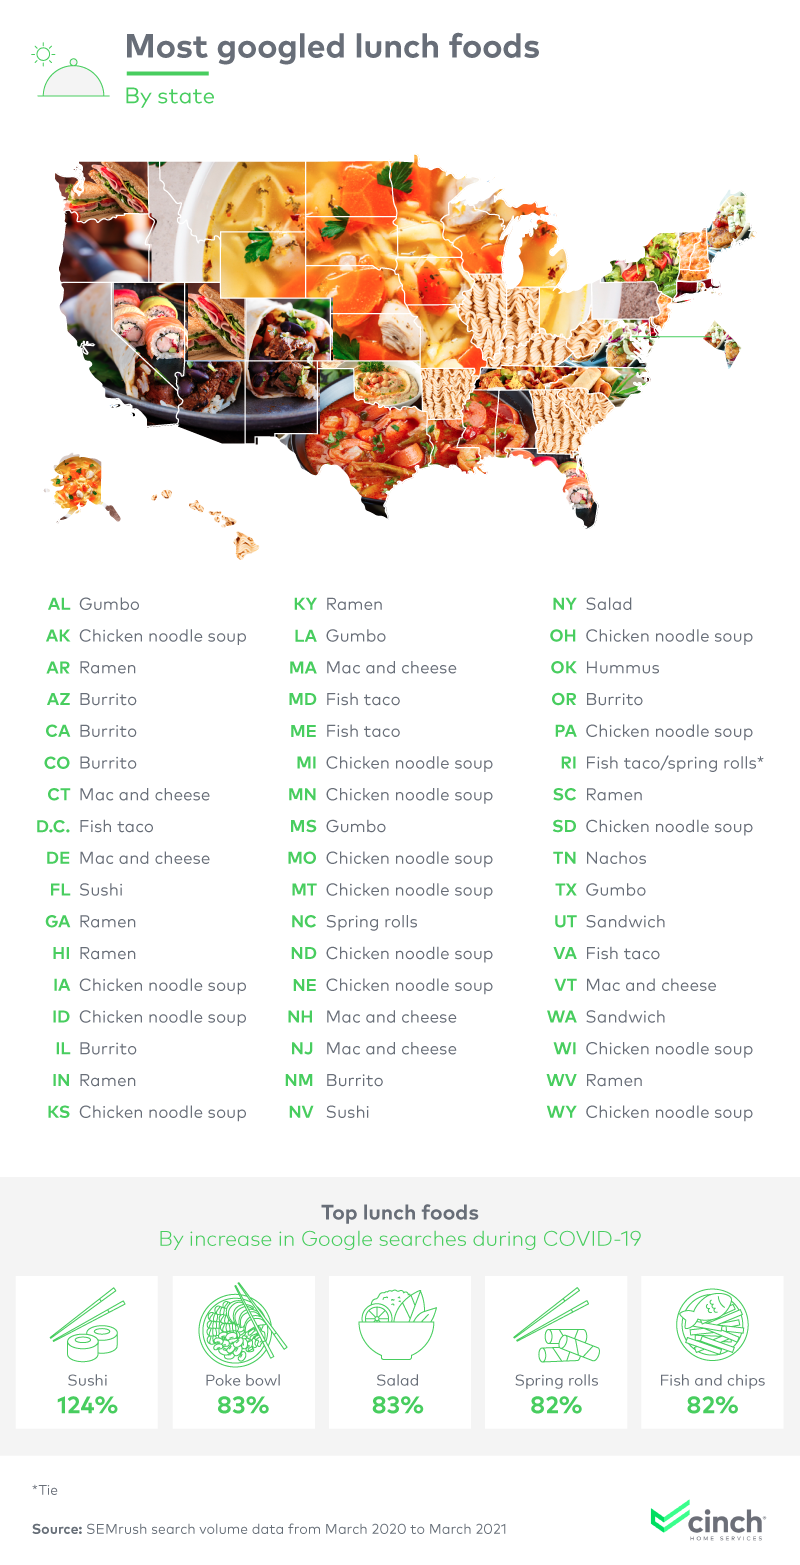 Most googled lunch foods